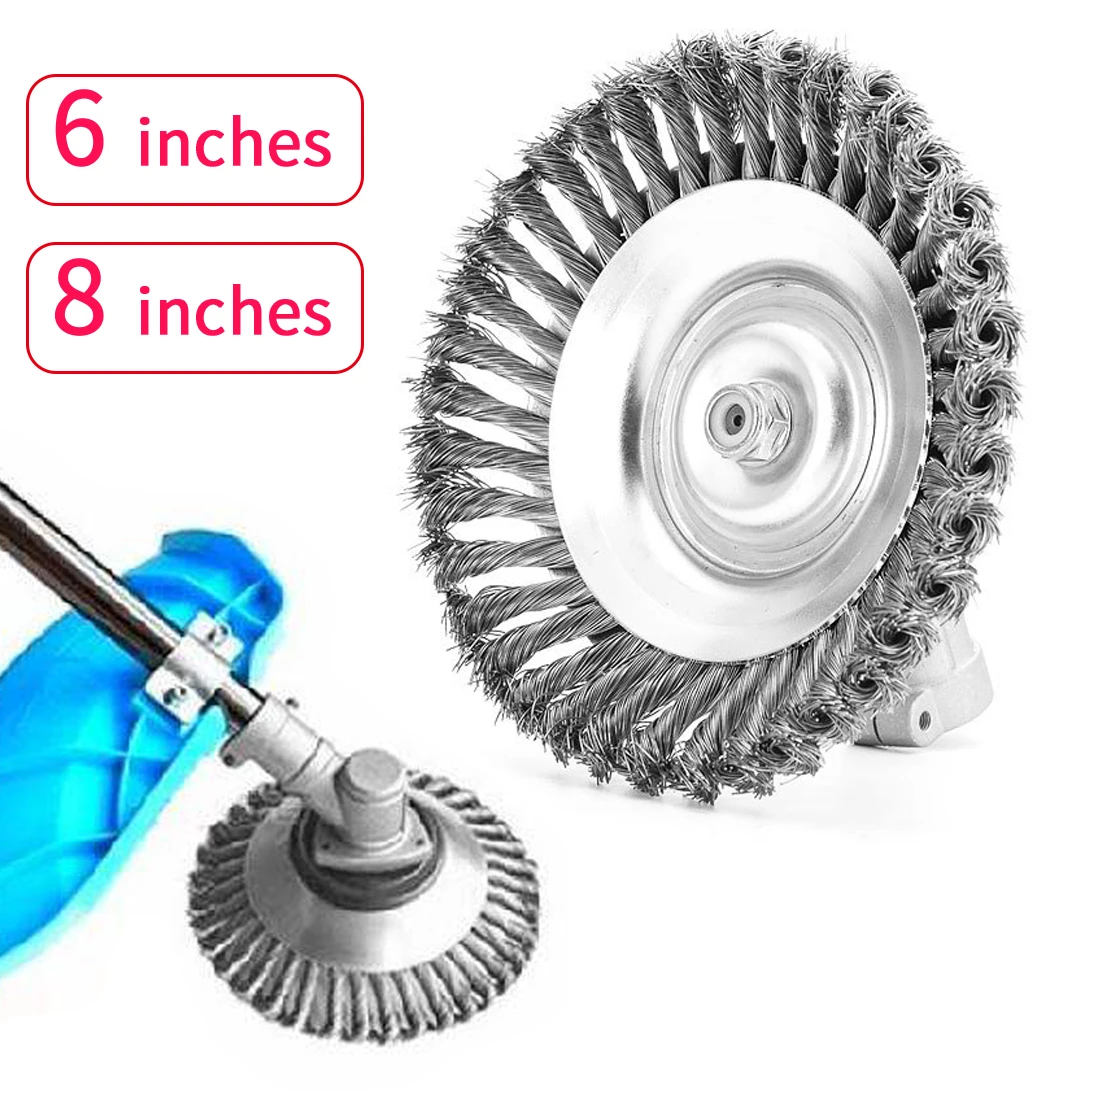 

6 inch/ 8 inch Grass Trimmer Head Steel Wire Trimming Head Rusting Brush Cutter Mower Wire Weeding Head for Lawn Mower